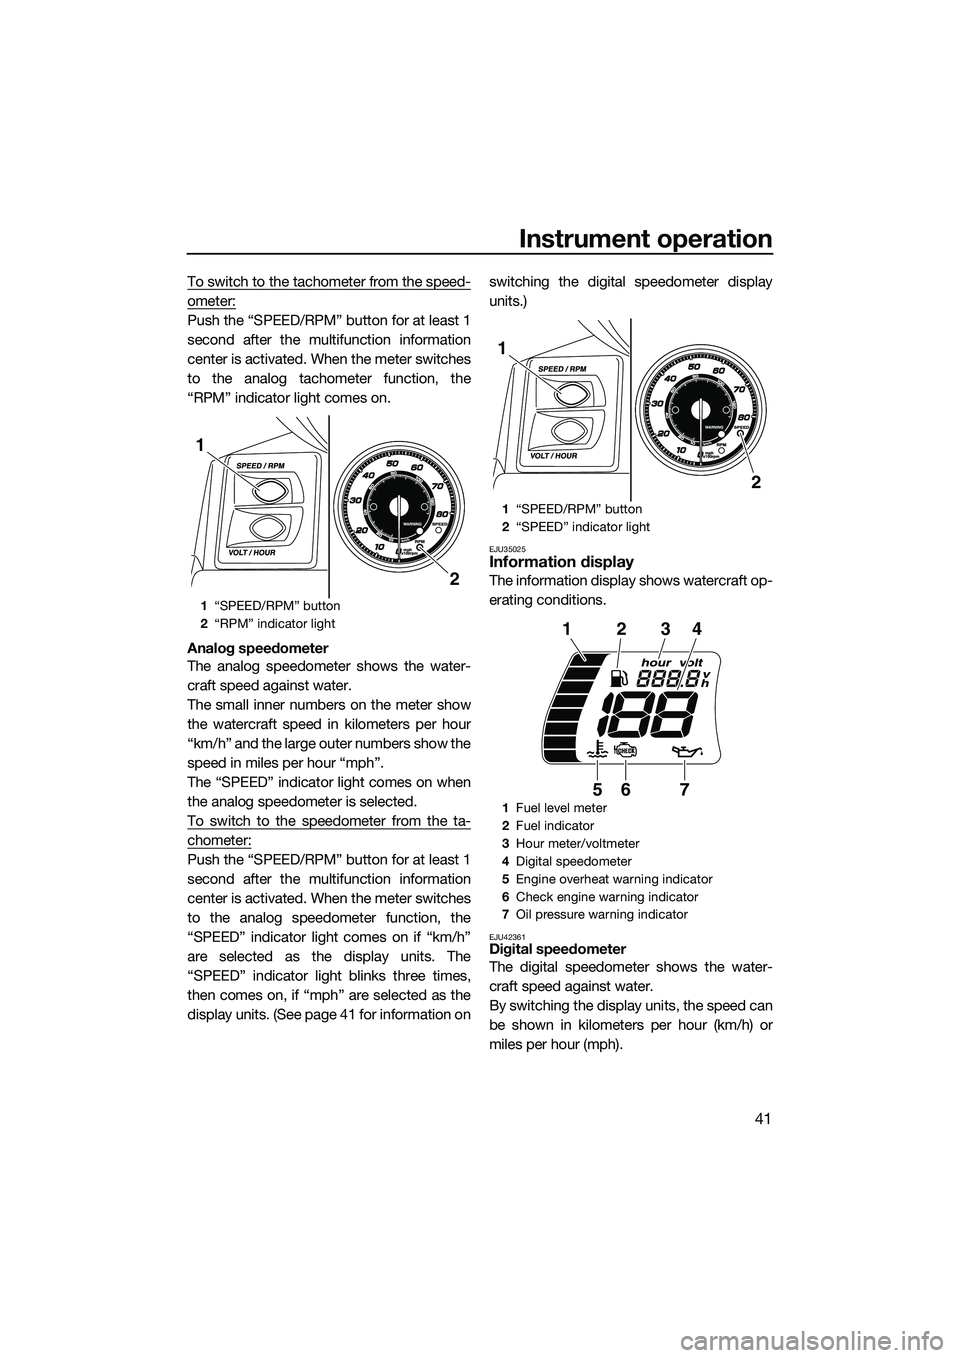 YAMAHA FX SVHO 2014  Owners Manual Instrument operation
41
To switch to the tachometer from the speed-
ometer:
Push the “SPEED/RPM” button for at least 1
second after the multifunction information
center is activated. When the mete